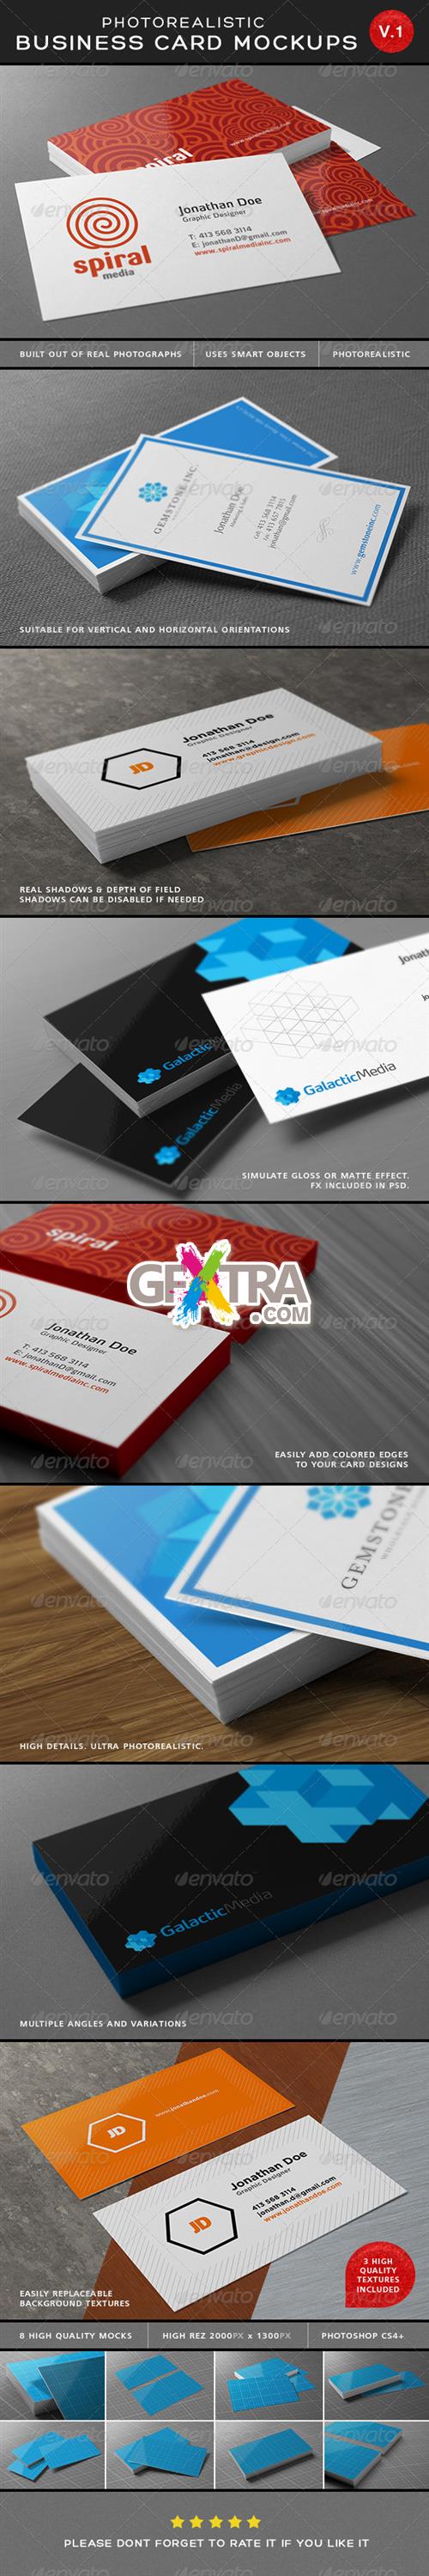 GraphicRiver - Ultimate Photorealistic Business Card Mockups 6543659